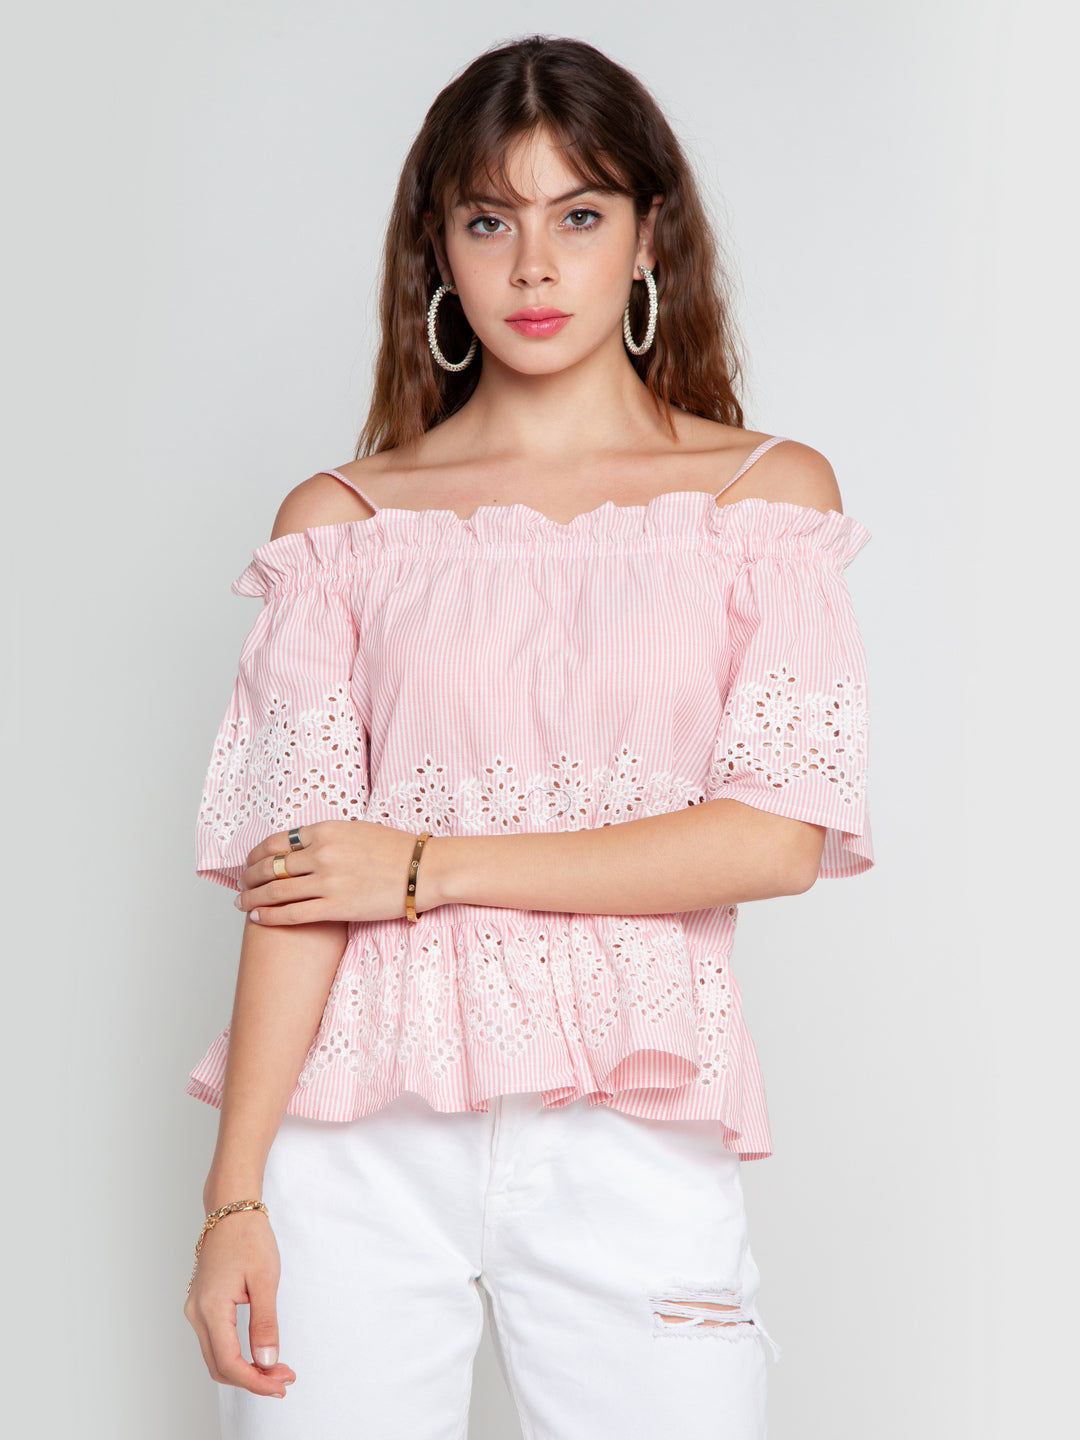 Pink Embroidered Bardot Top for Women